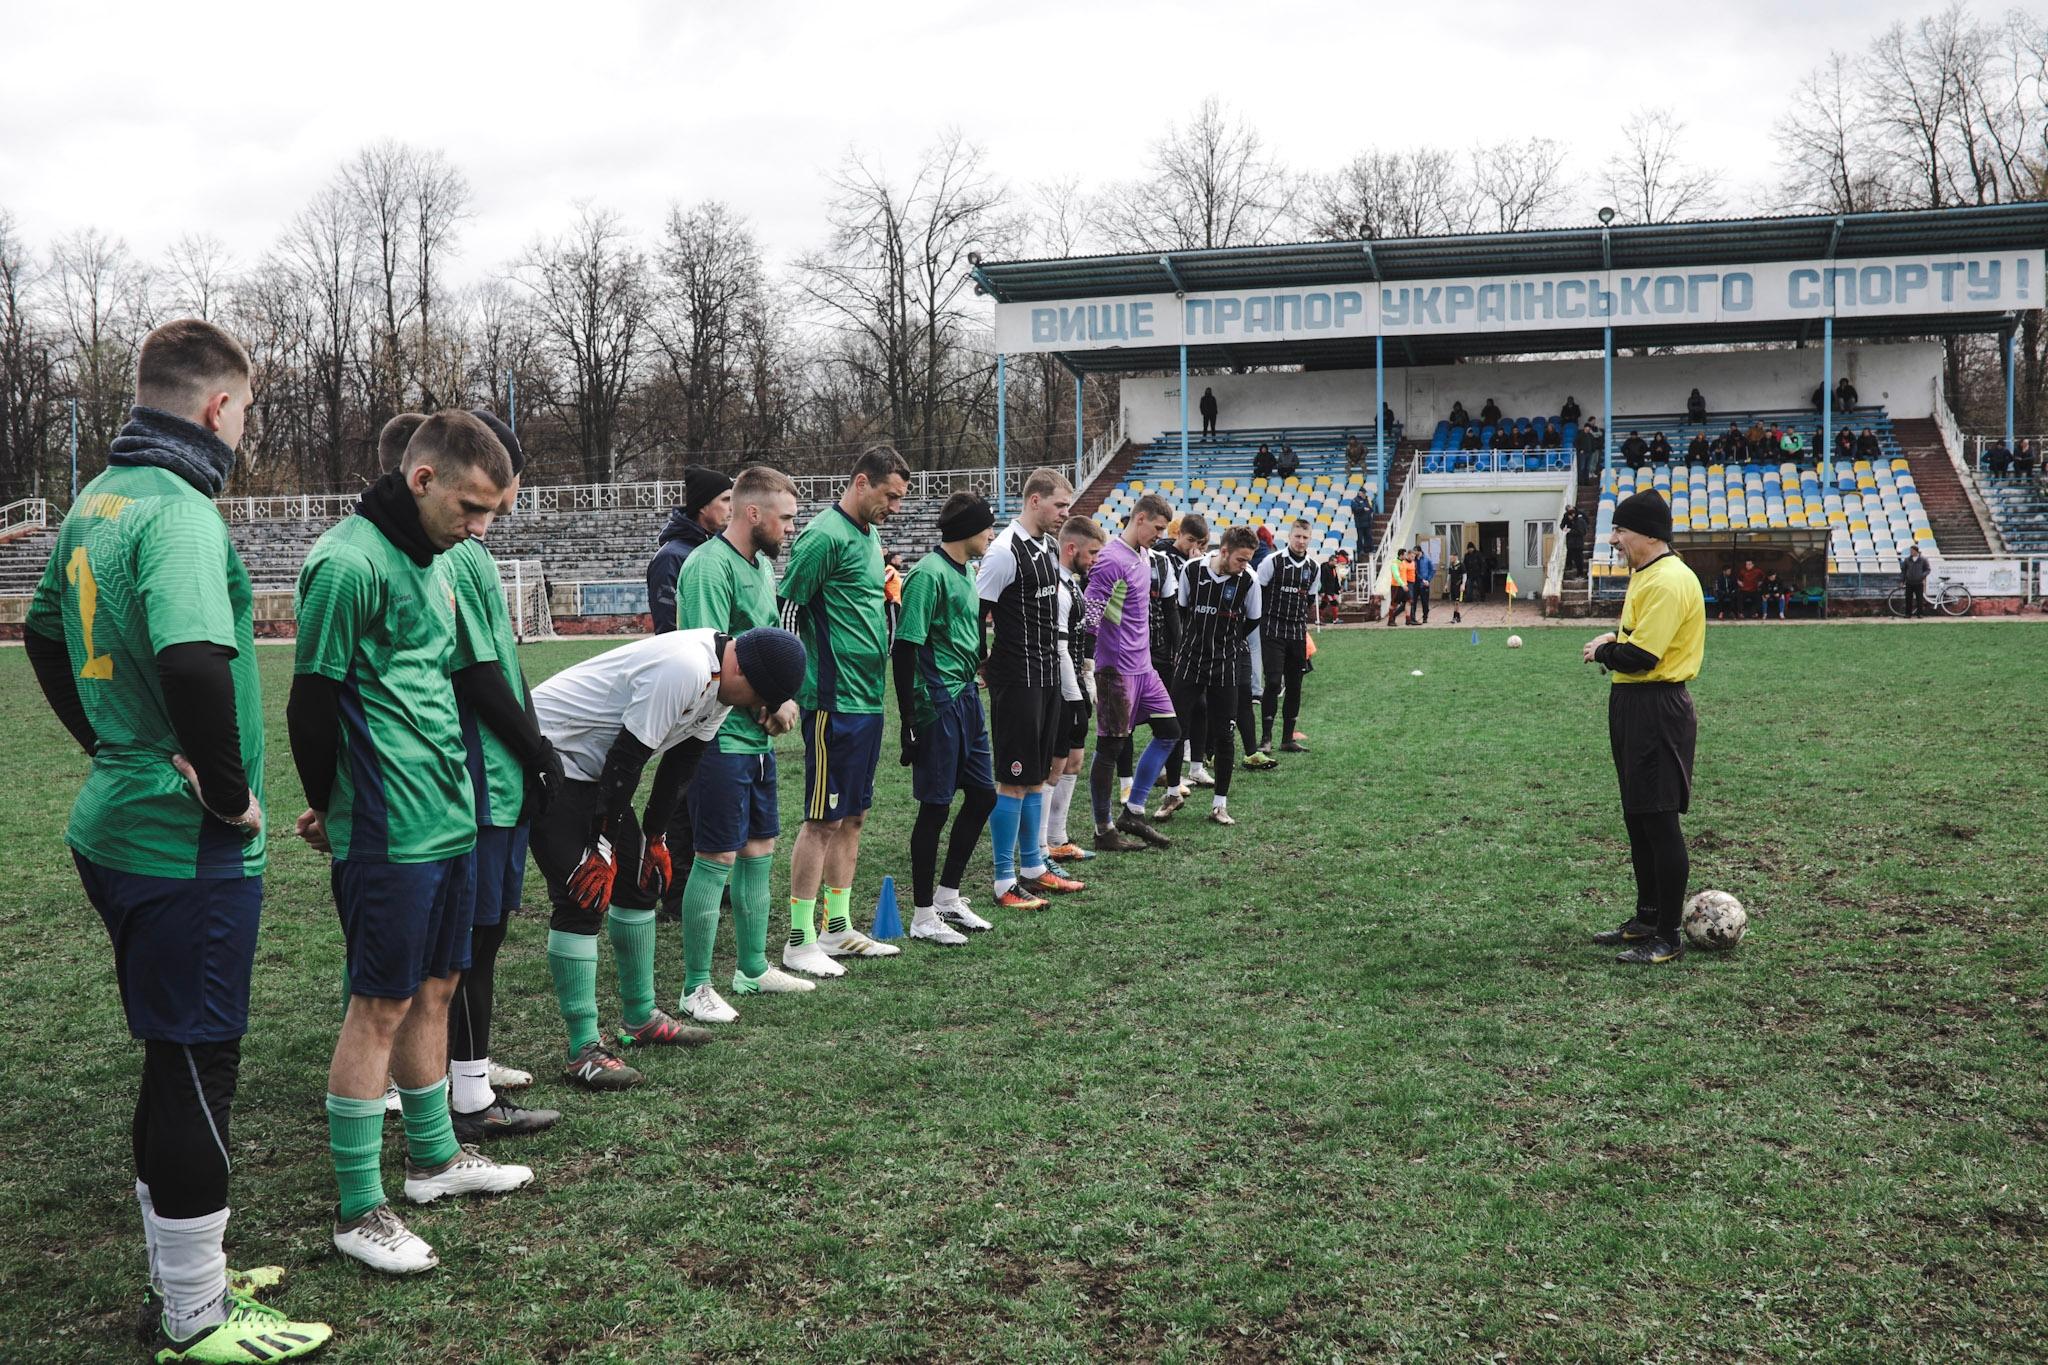 Anadolu/Getty - First vestige of football in Ukraine after more than 50 days of war